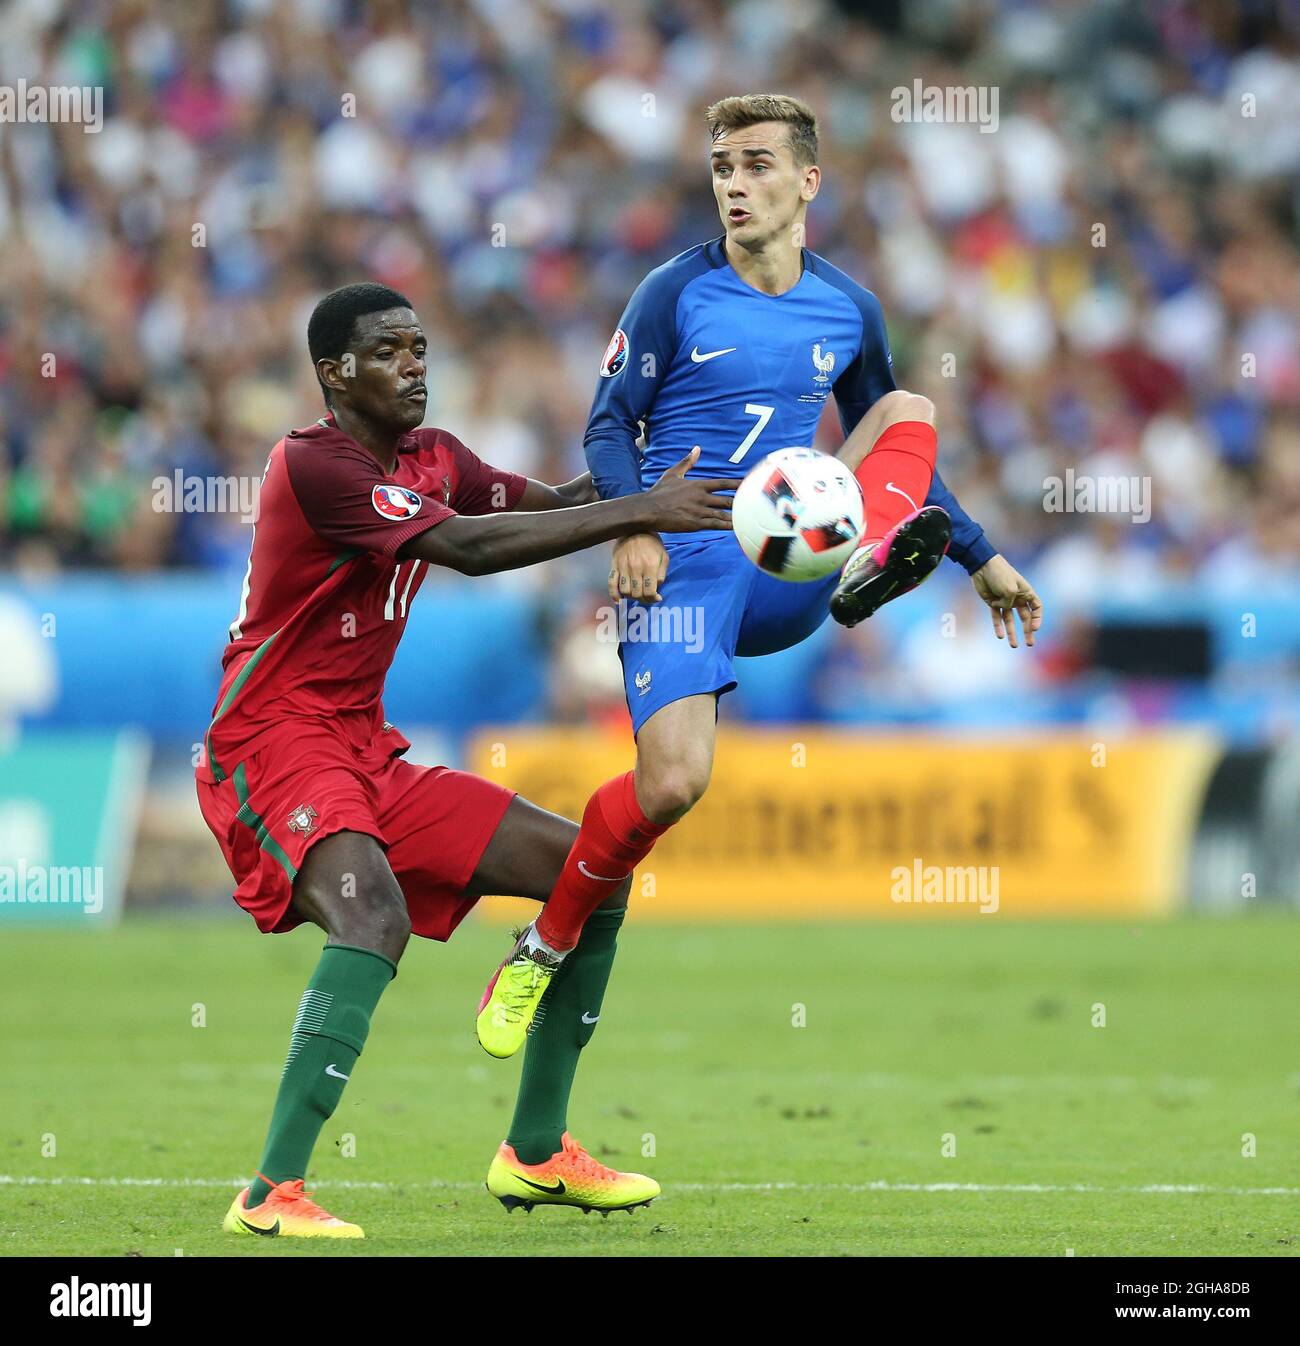 Antoine Griezmann of France tussles with William Carvalho of Portugal during the UEFA European Championship 2016 final match at the Stade de France, Paris. Picture date July 10th, 2016 Pic David Klein/Sportimage via PA Images Stock Photo